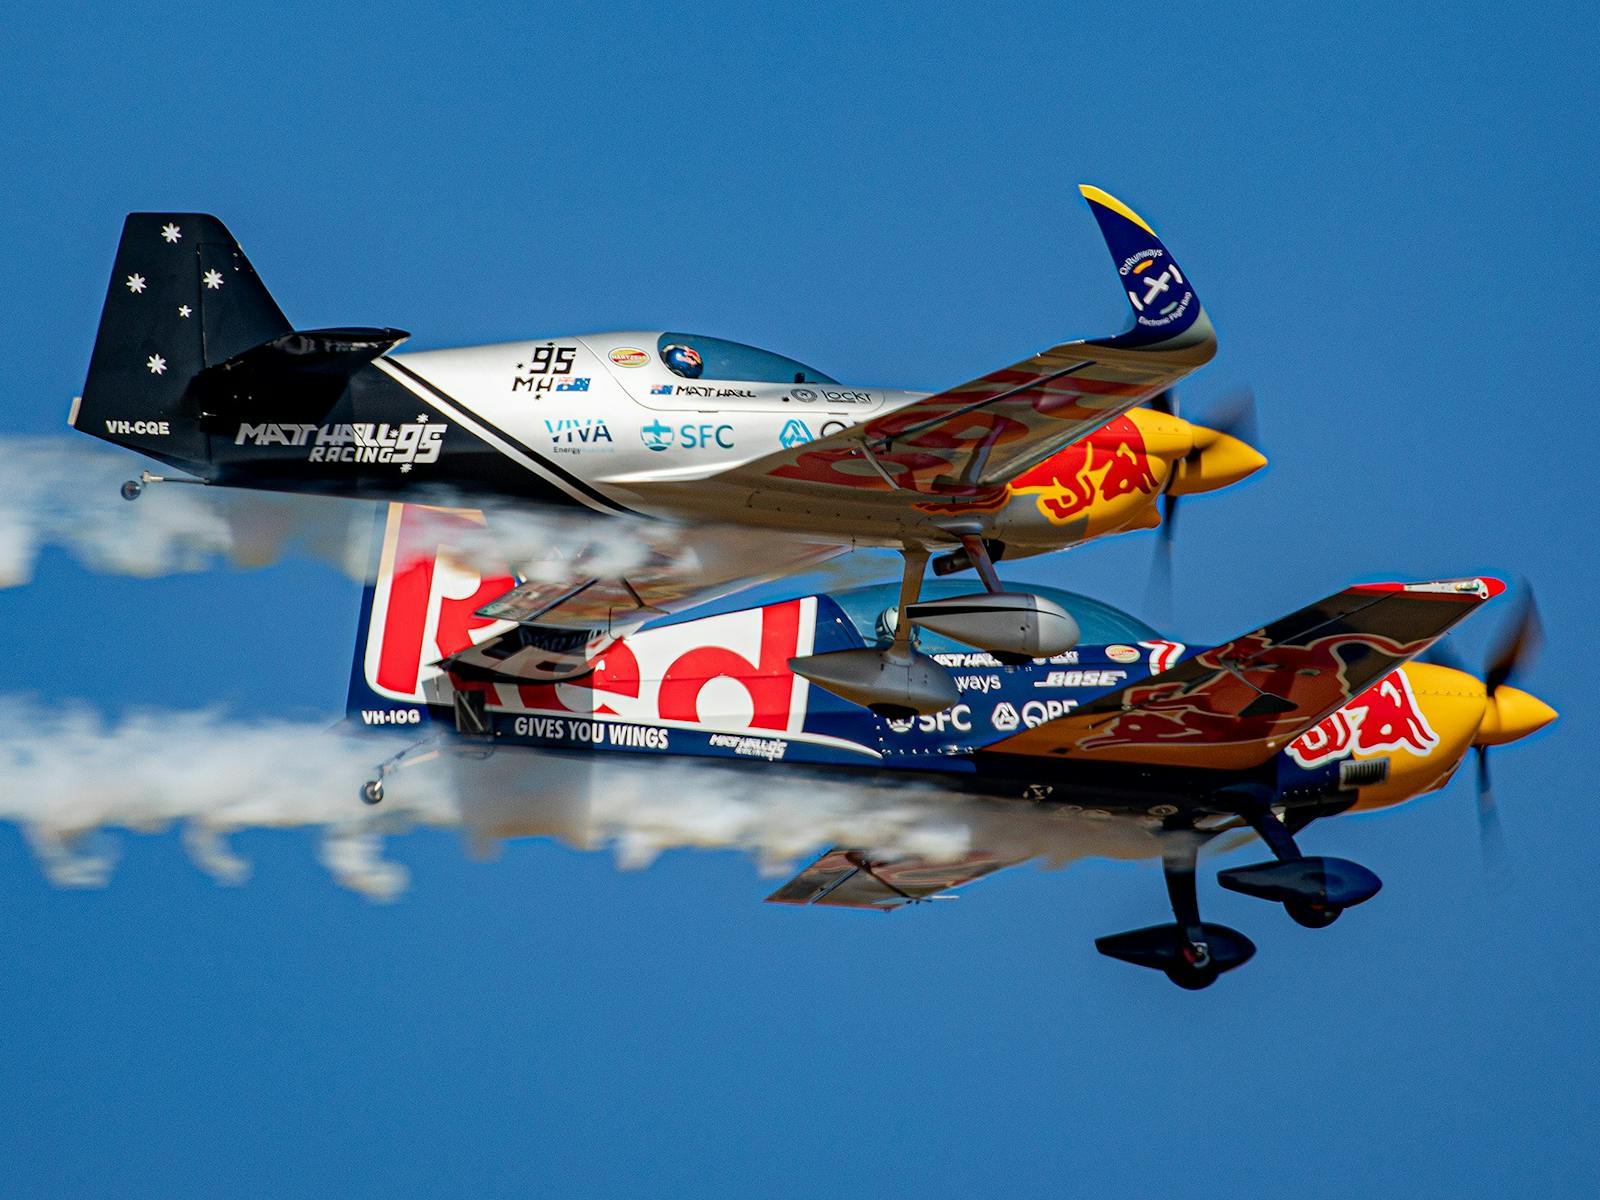 Matt Hall Team with two aircraft flying close together